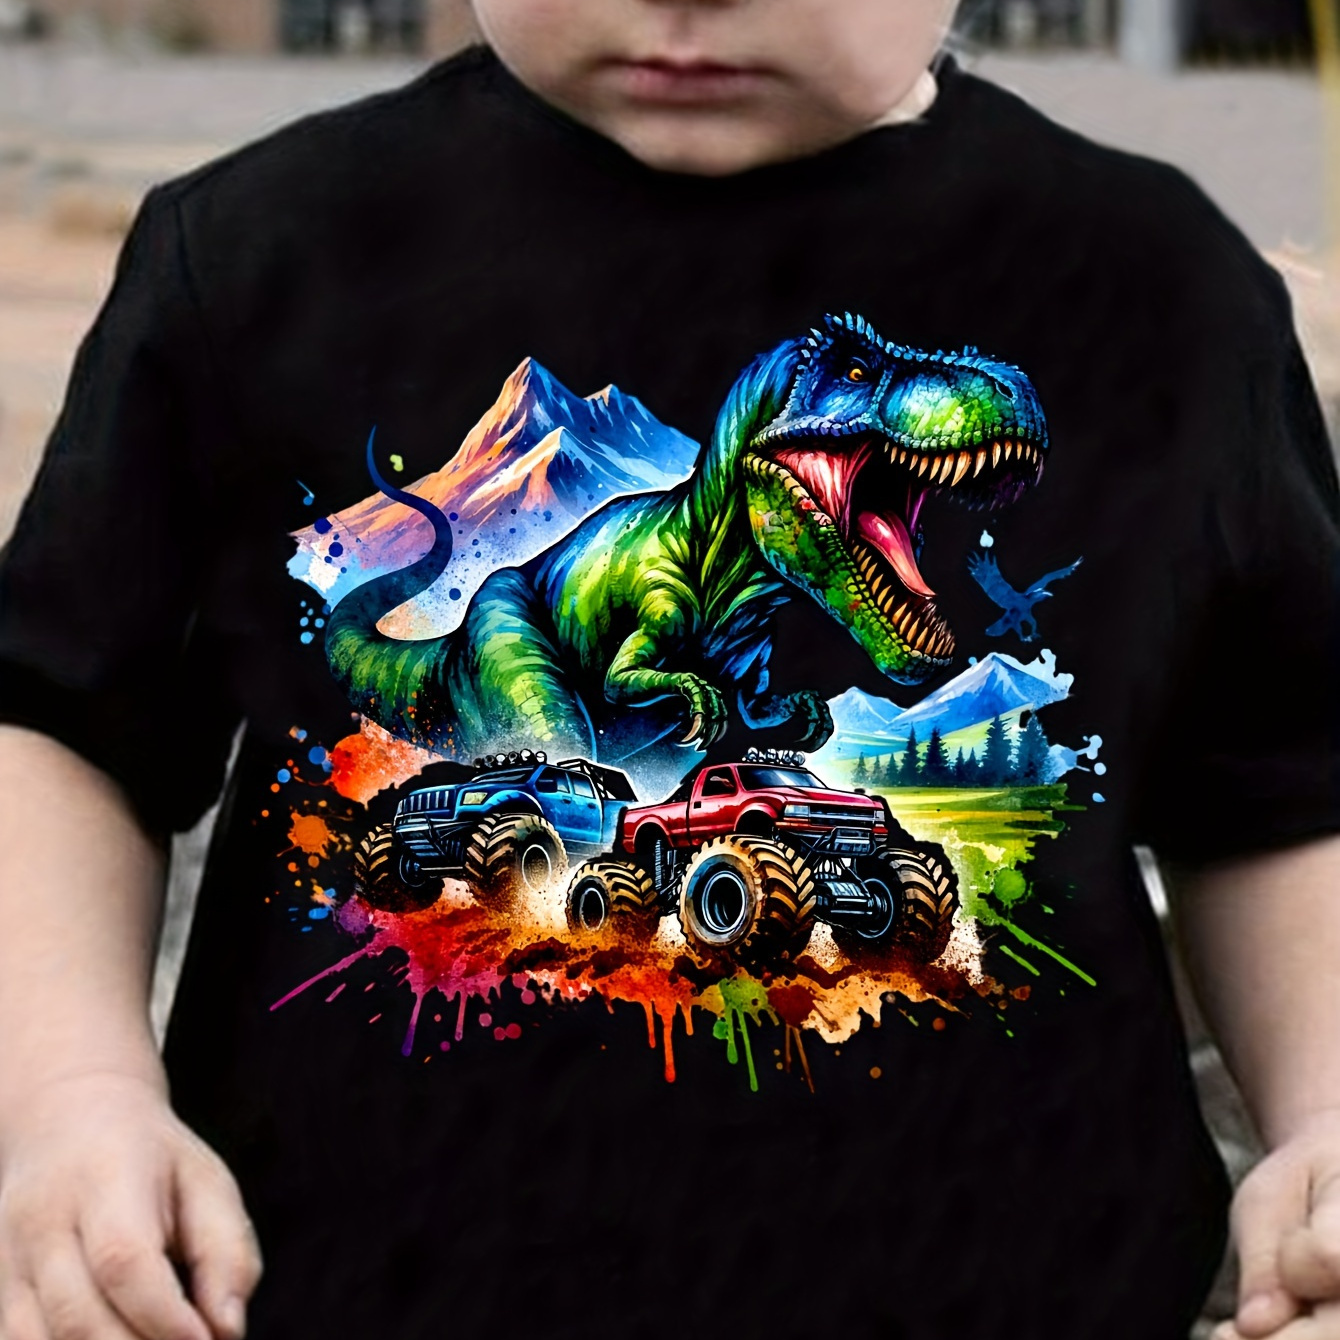 

Colorful Dino And Monster Truck Print Boy's Creative T-shirt, Vibrant Comfortable Crew Neck Top, Kids Summer Clothing